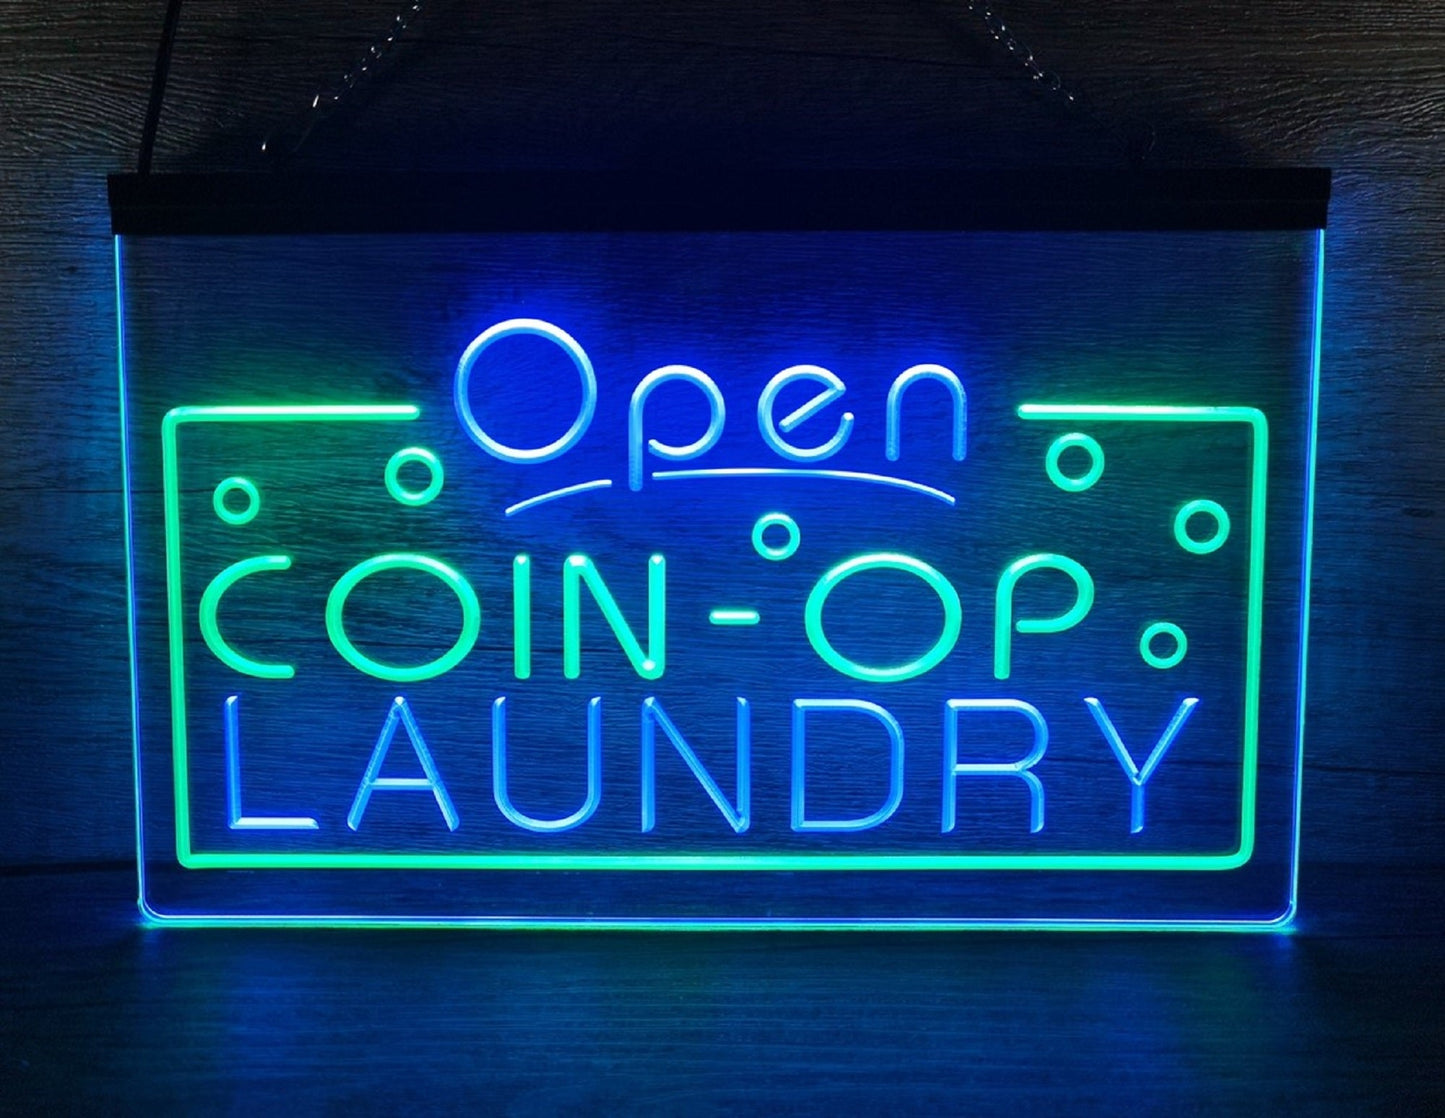 Neon Sign Dual Color Open Coin-op Laundry Wall Desktop Decor Free Shipping